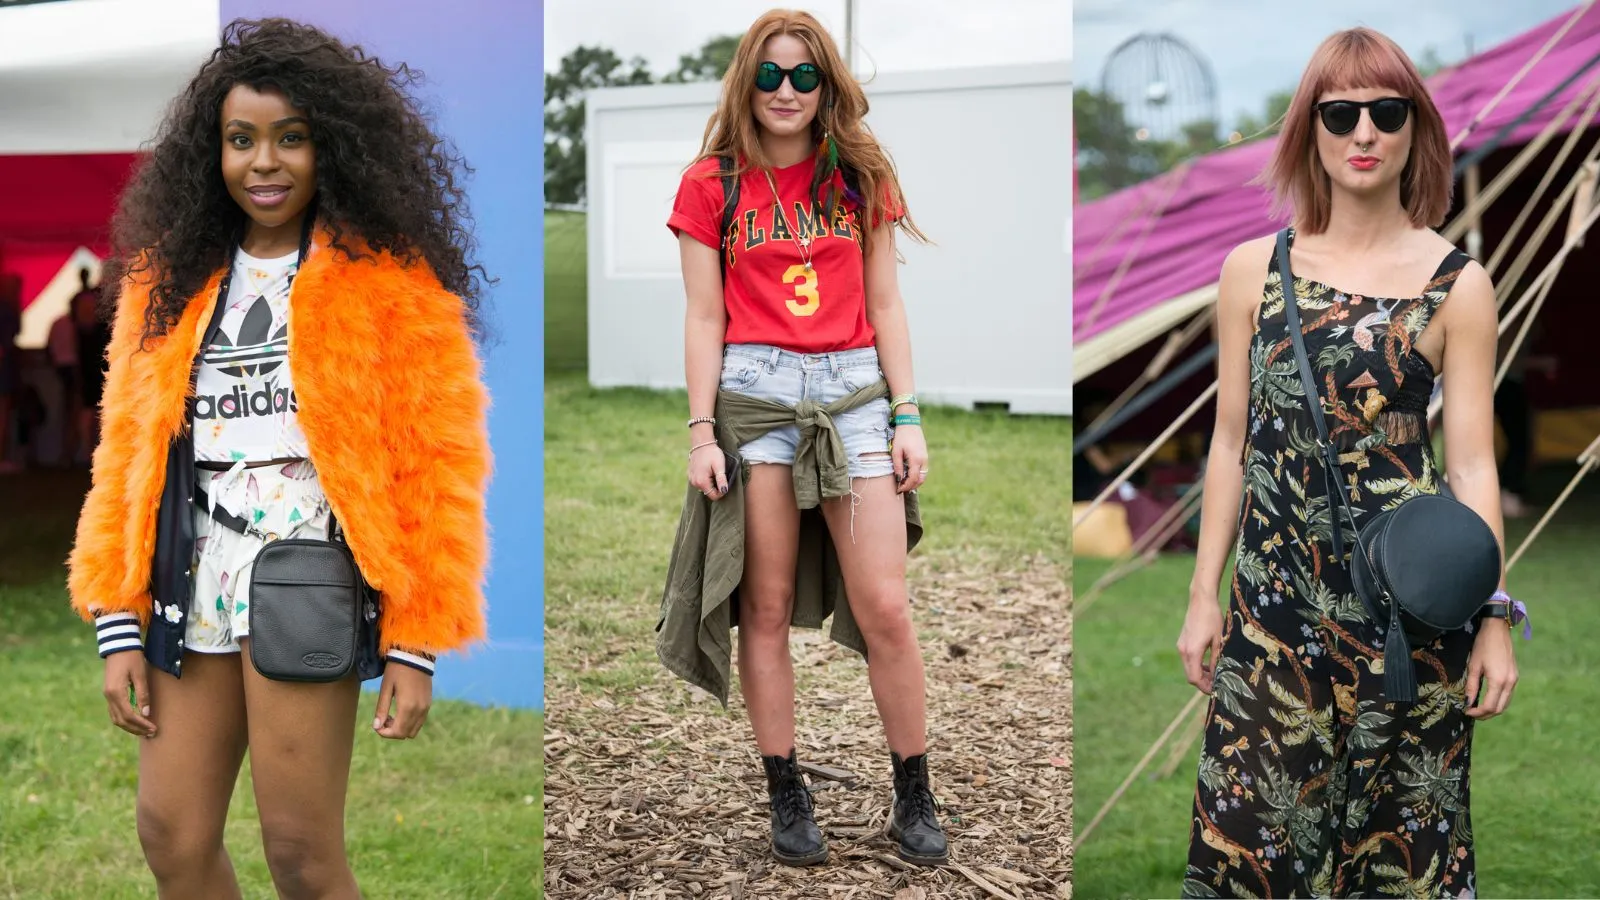 How to Choose the Best Festival Clothing